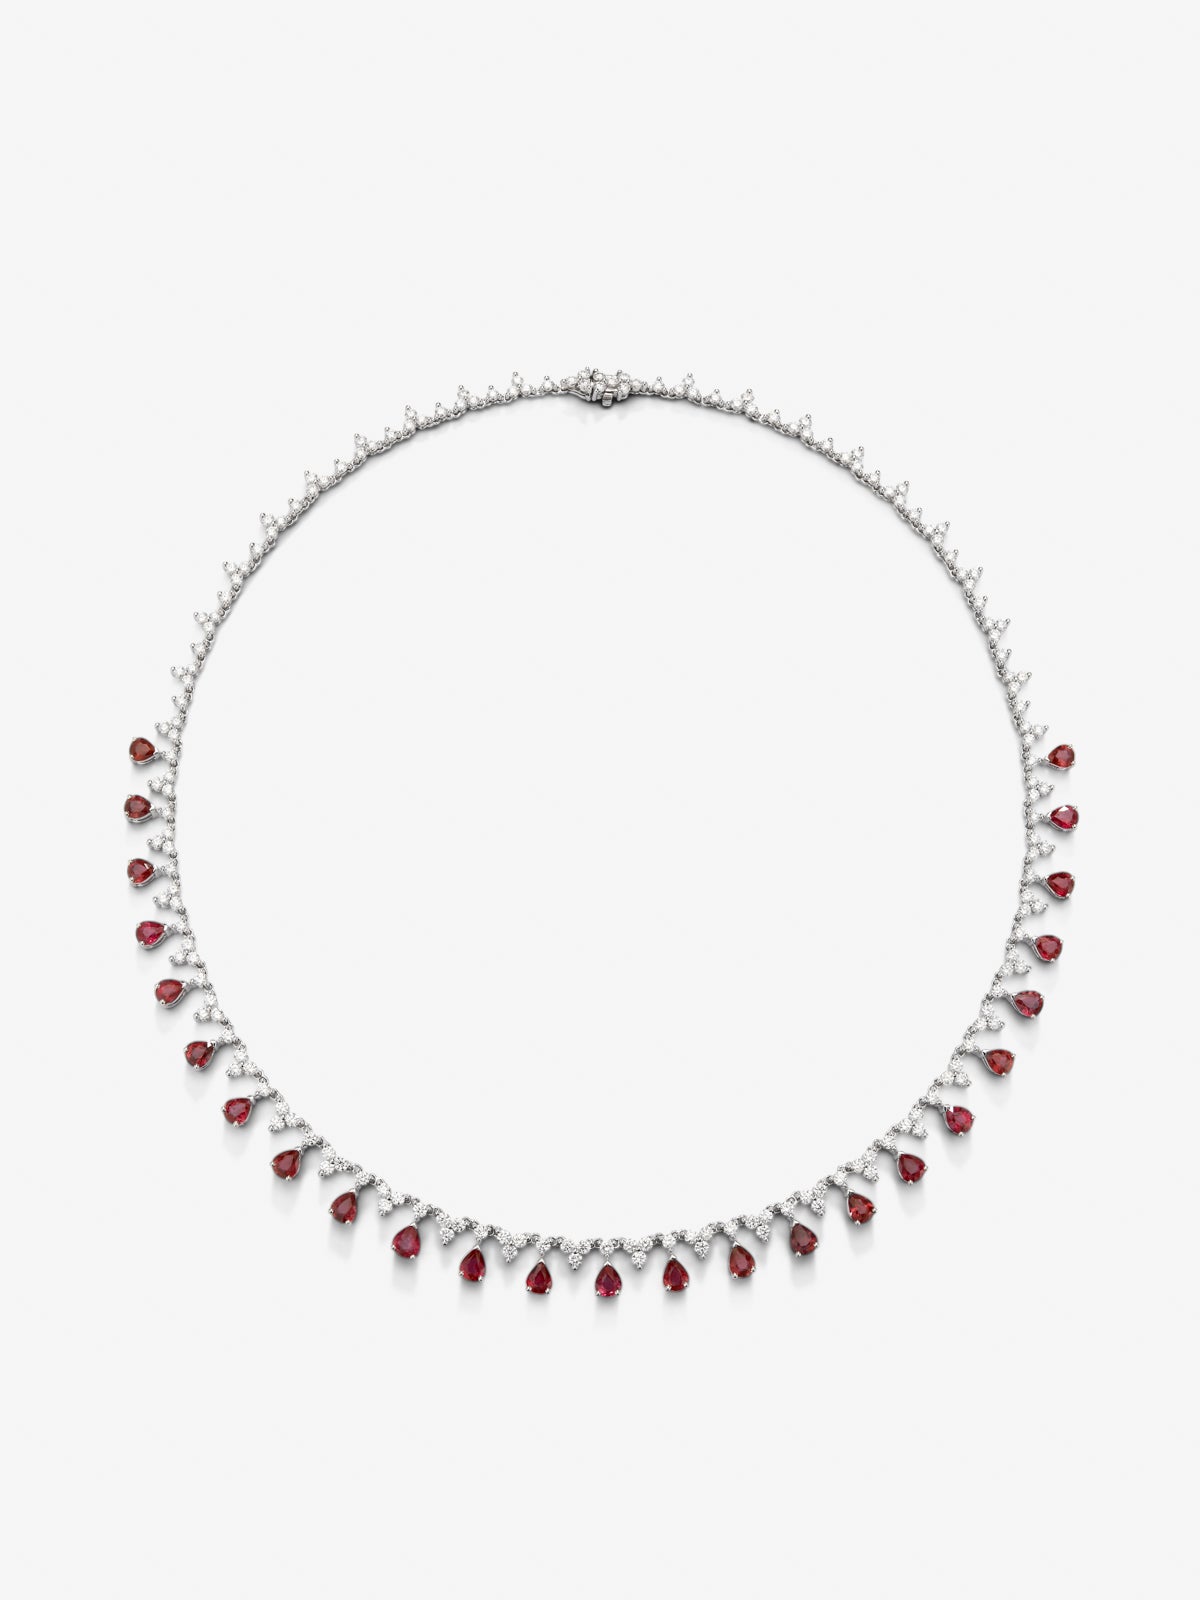 18K White Gold Rivière Collar with Red Rubyes in PESA Size 8.53 cts and White Diamonds in Bright Size 7.63 CTS